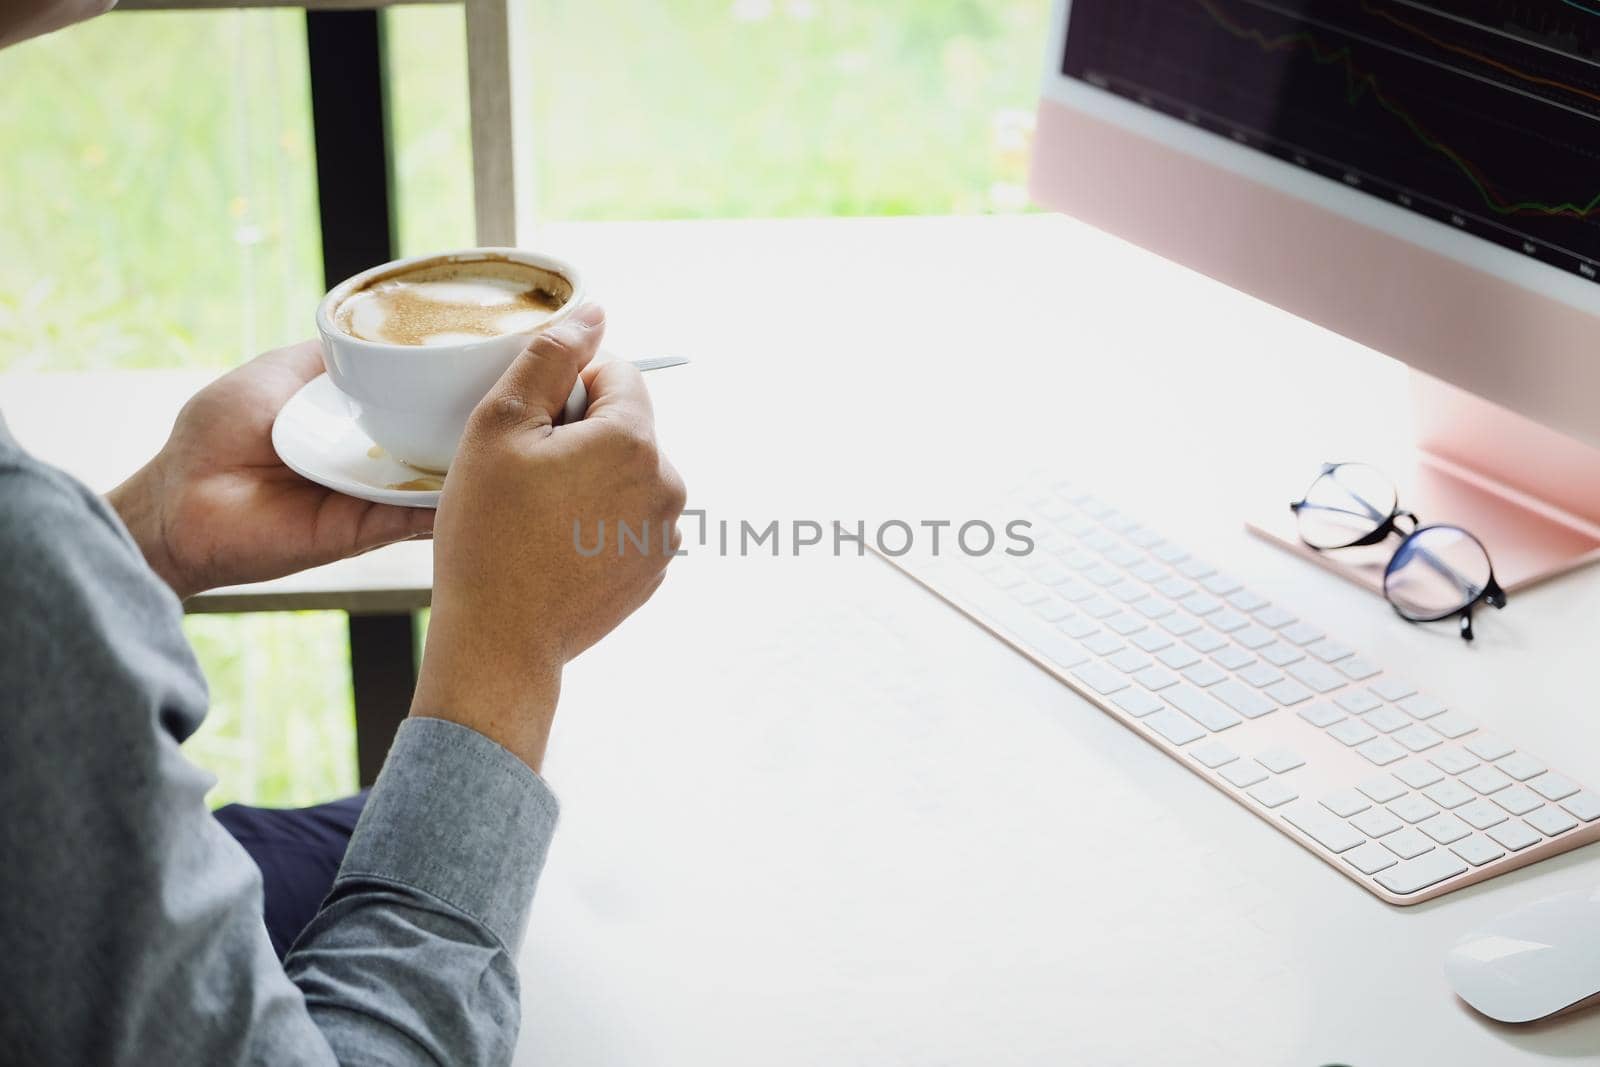 Work from home A company employee holding a coffee cup using a computer to work from home to prevent coronavirus from meeting outsiders